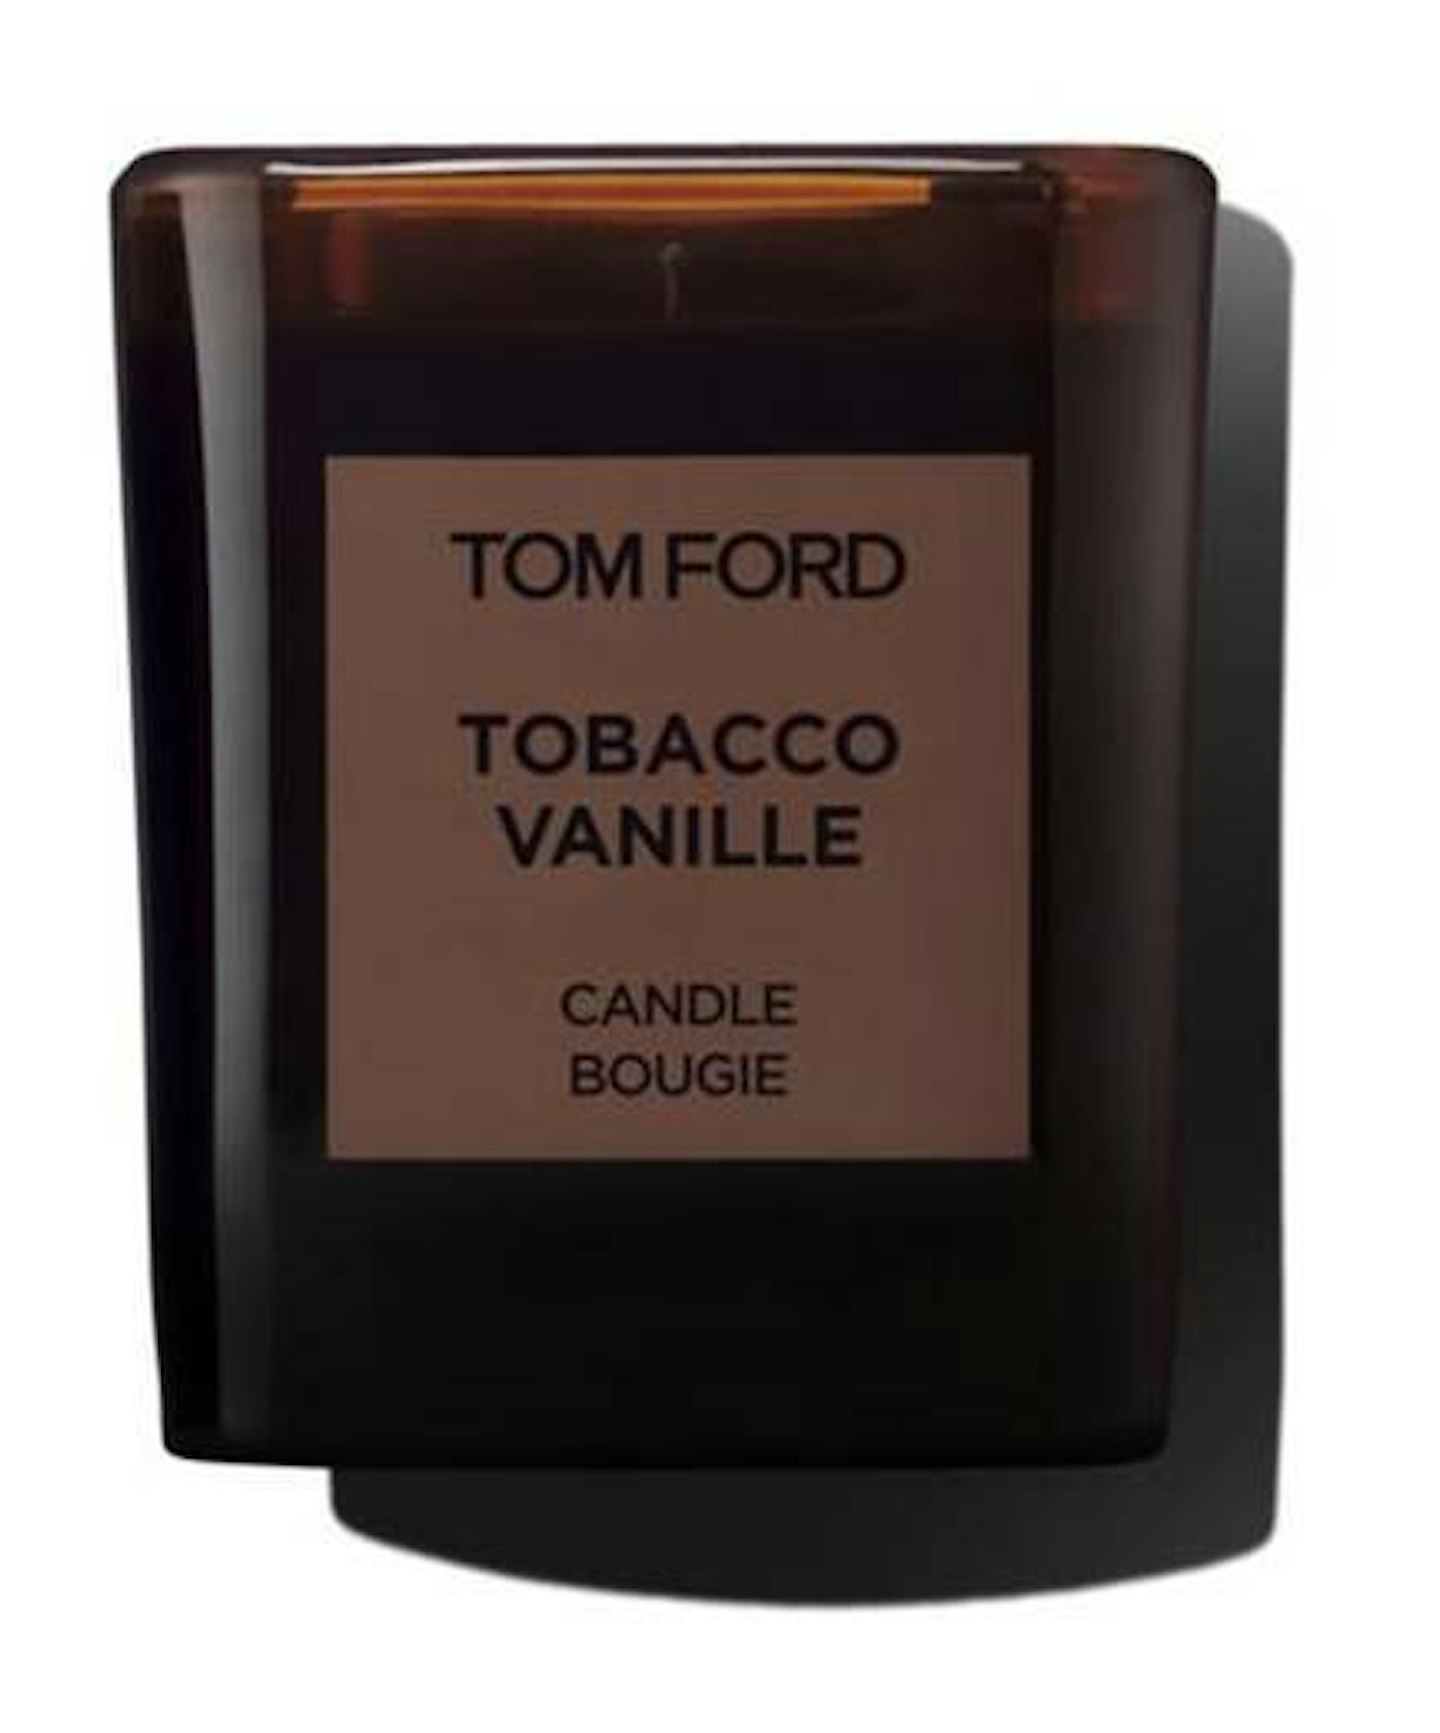 Tom Ford Tobacco Vanille Candle, £66